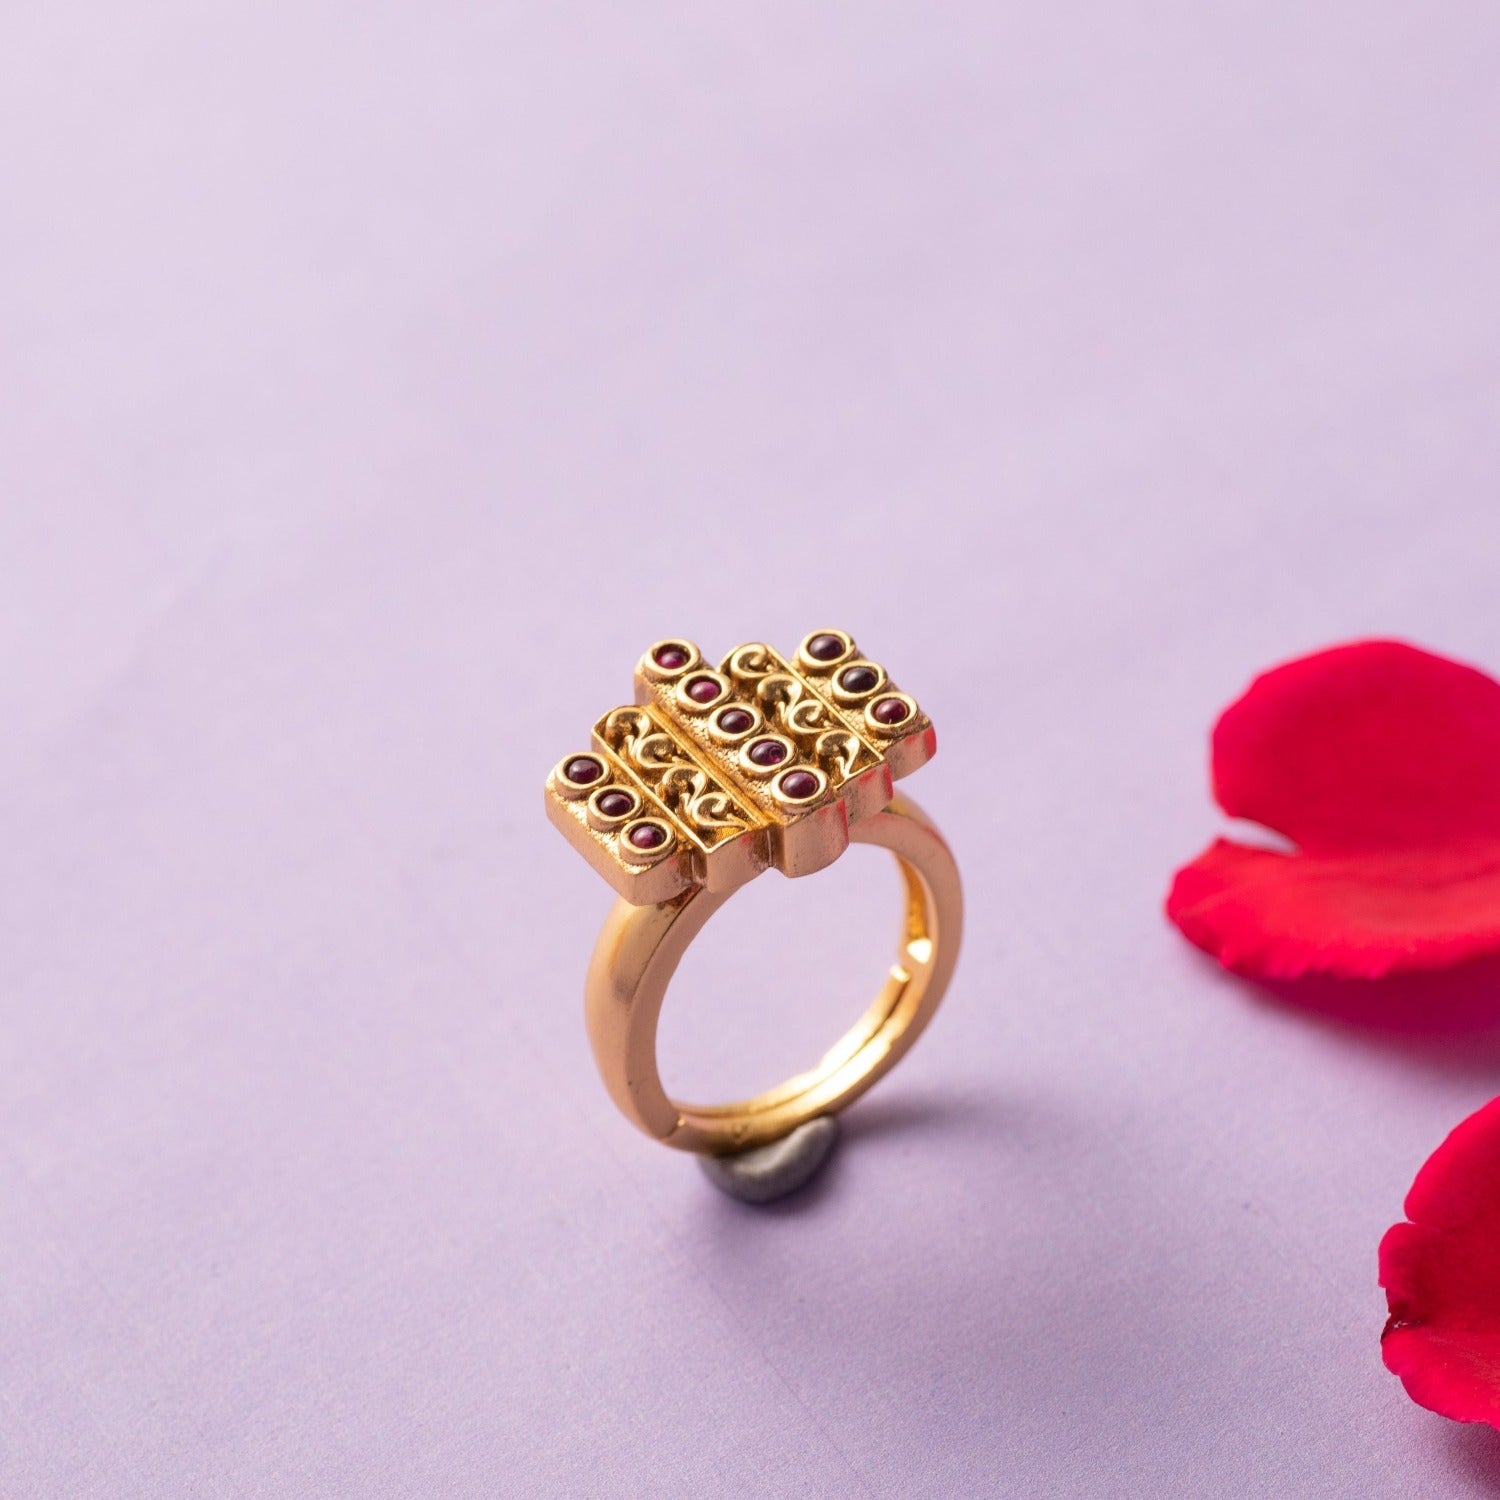 Pancharathna antique ring | Indian jewellery design earrings, Antique  engagement rings, Gold jewelry stores